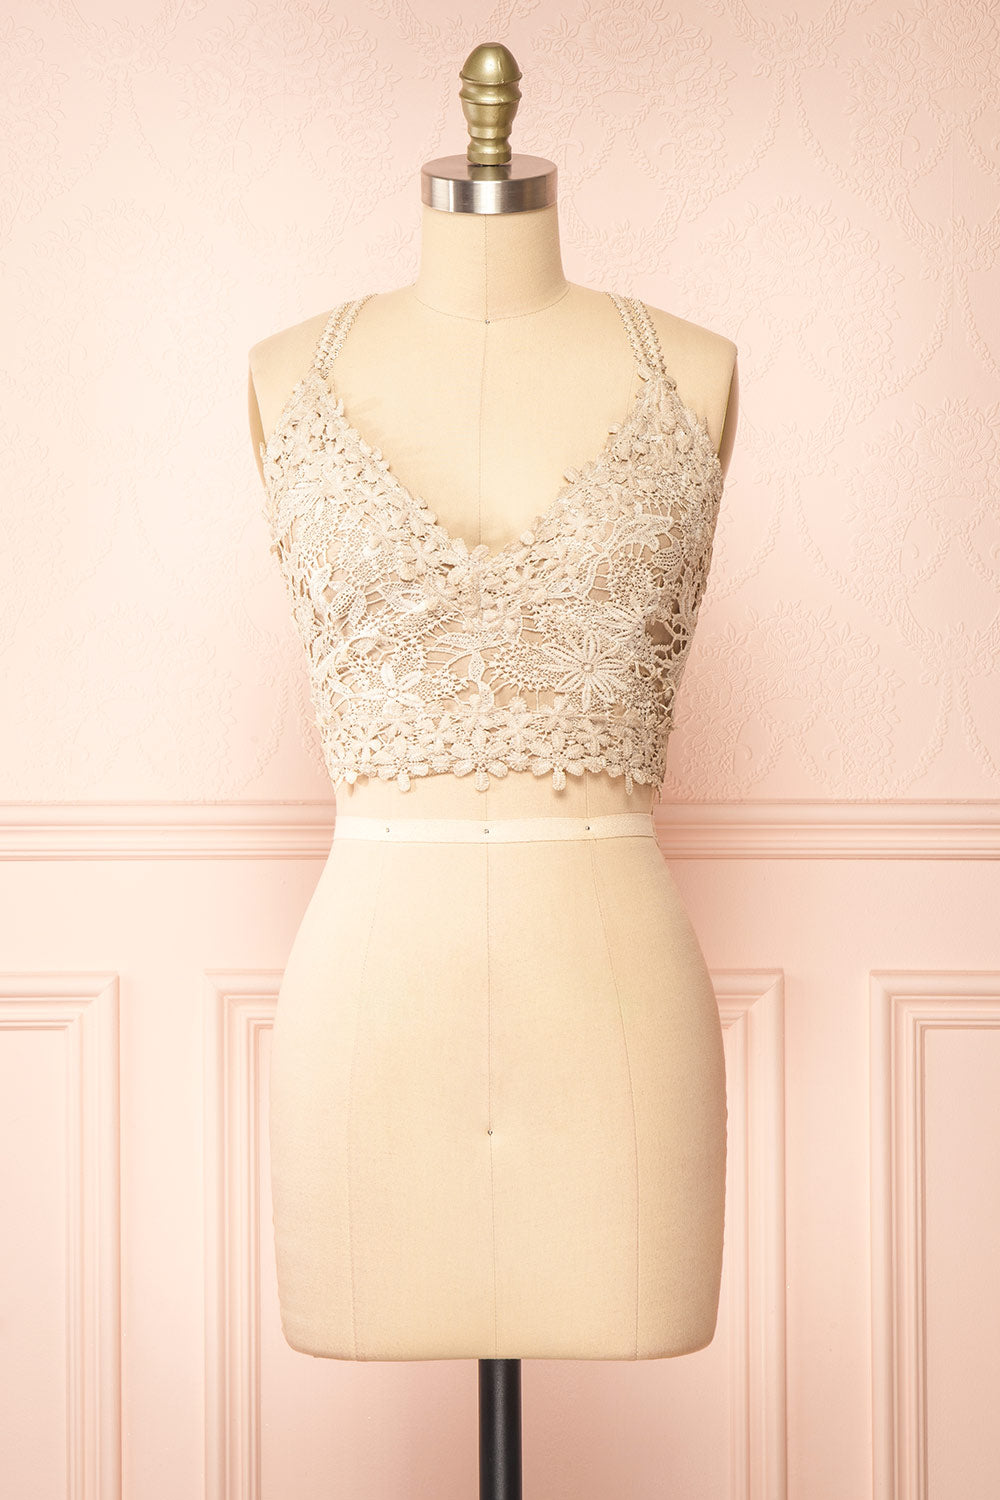 Moya Taupe Lace Crop Top | Boutique 1861 front view